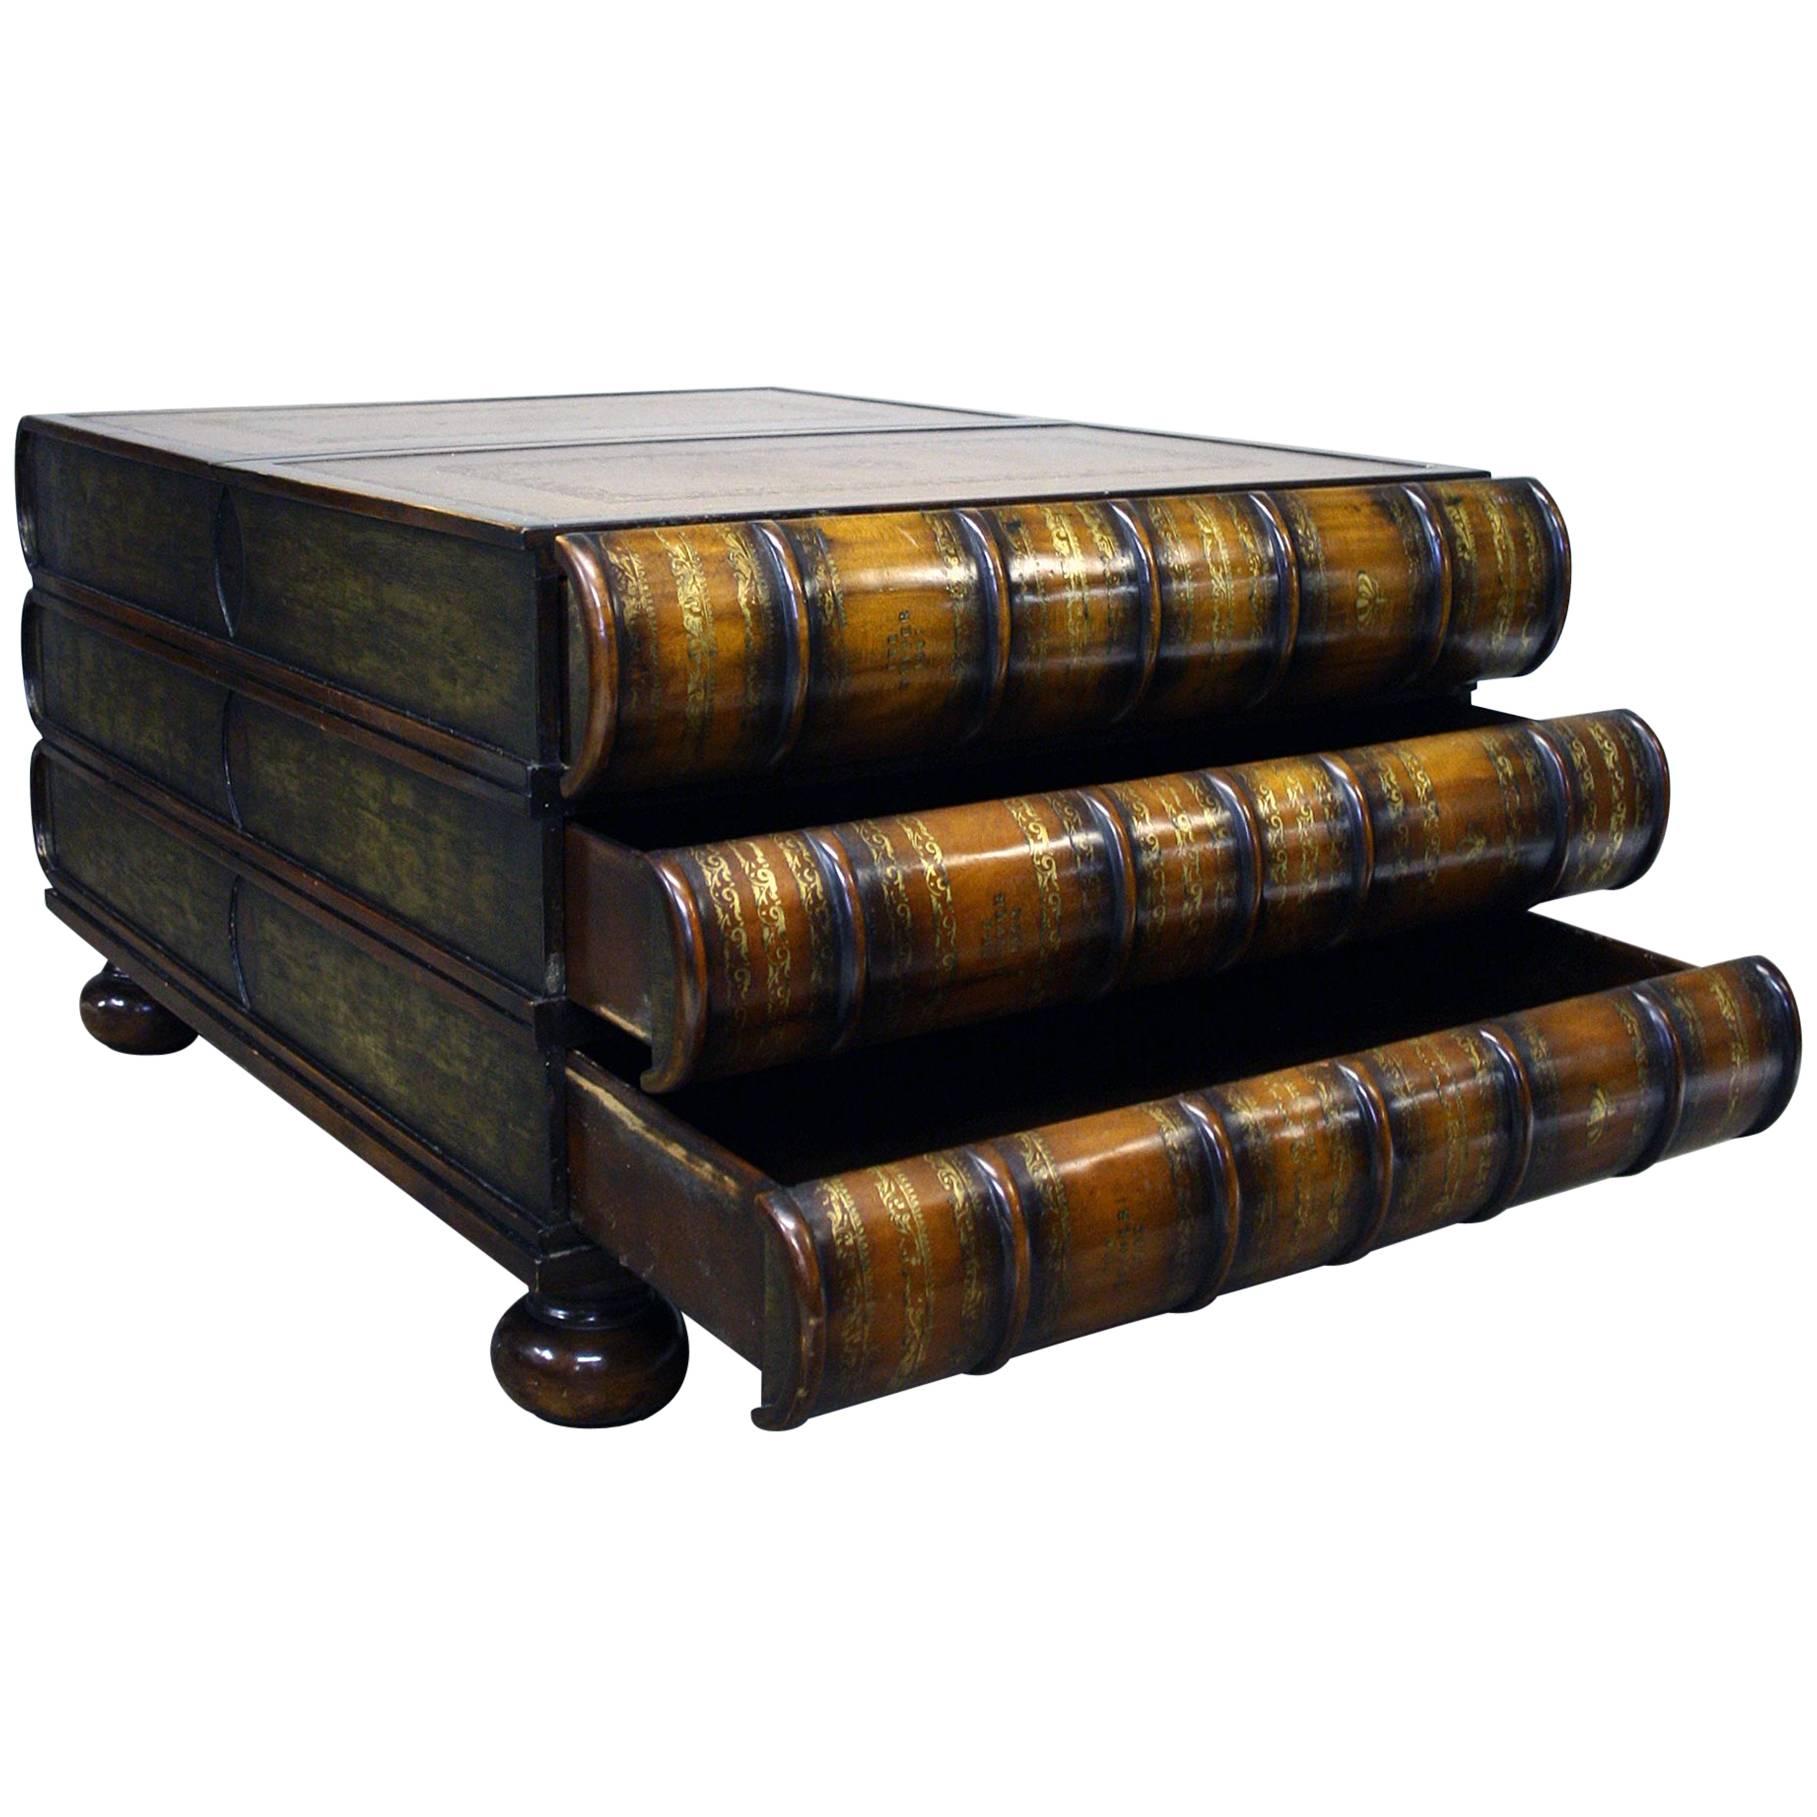 Maitland-Smith Stacked Book Coffee Table